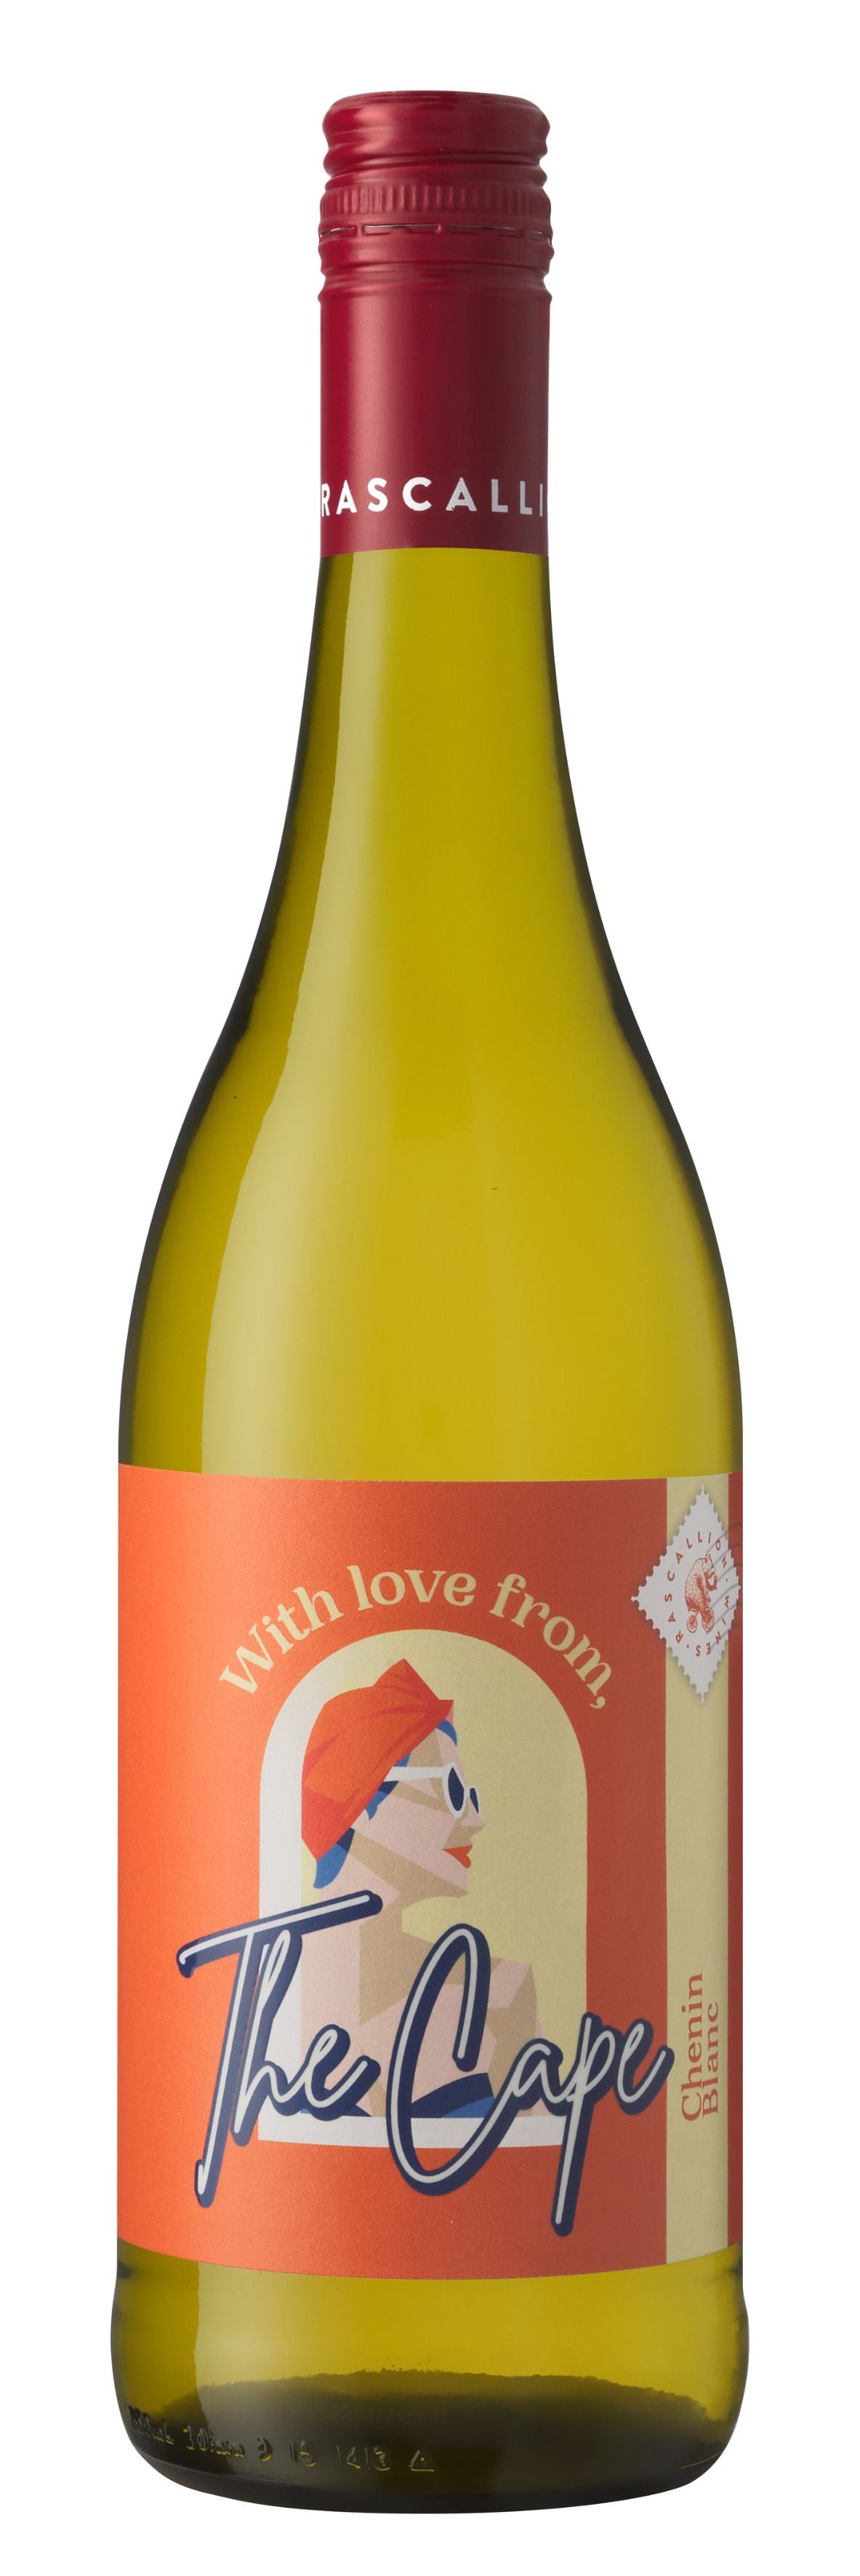 With Love from the Cape Chenin Blanc